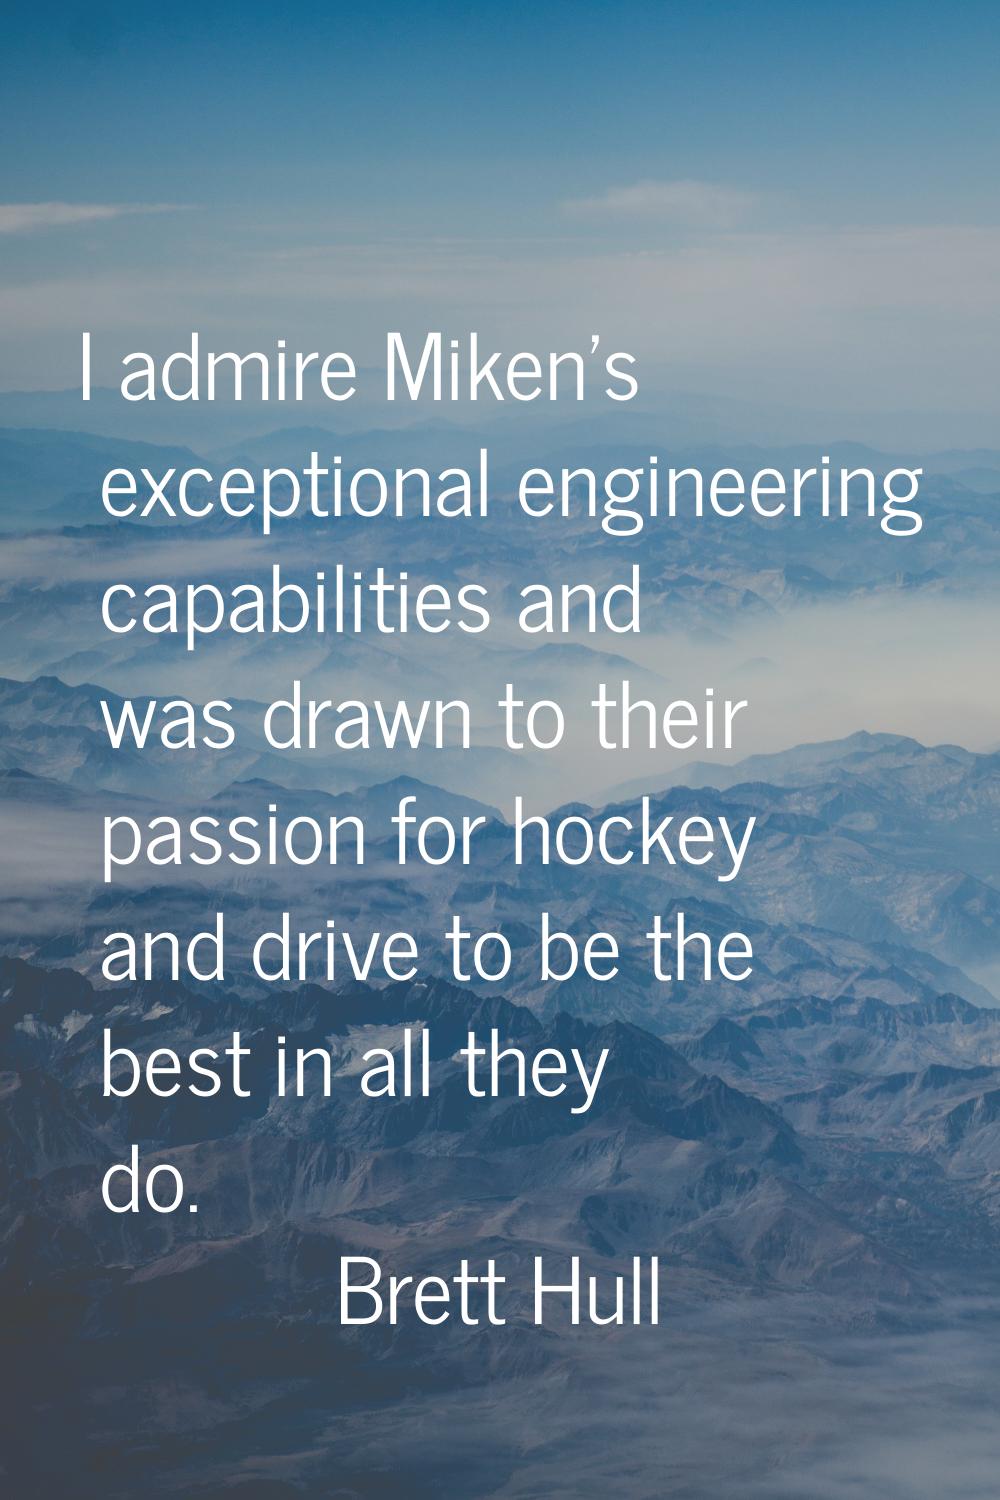 I admire Miken's exceptional engineering capabilities and was drawn to their passion for hockey and